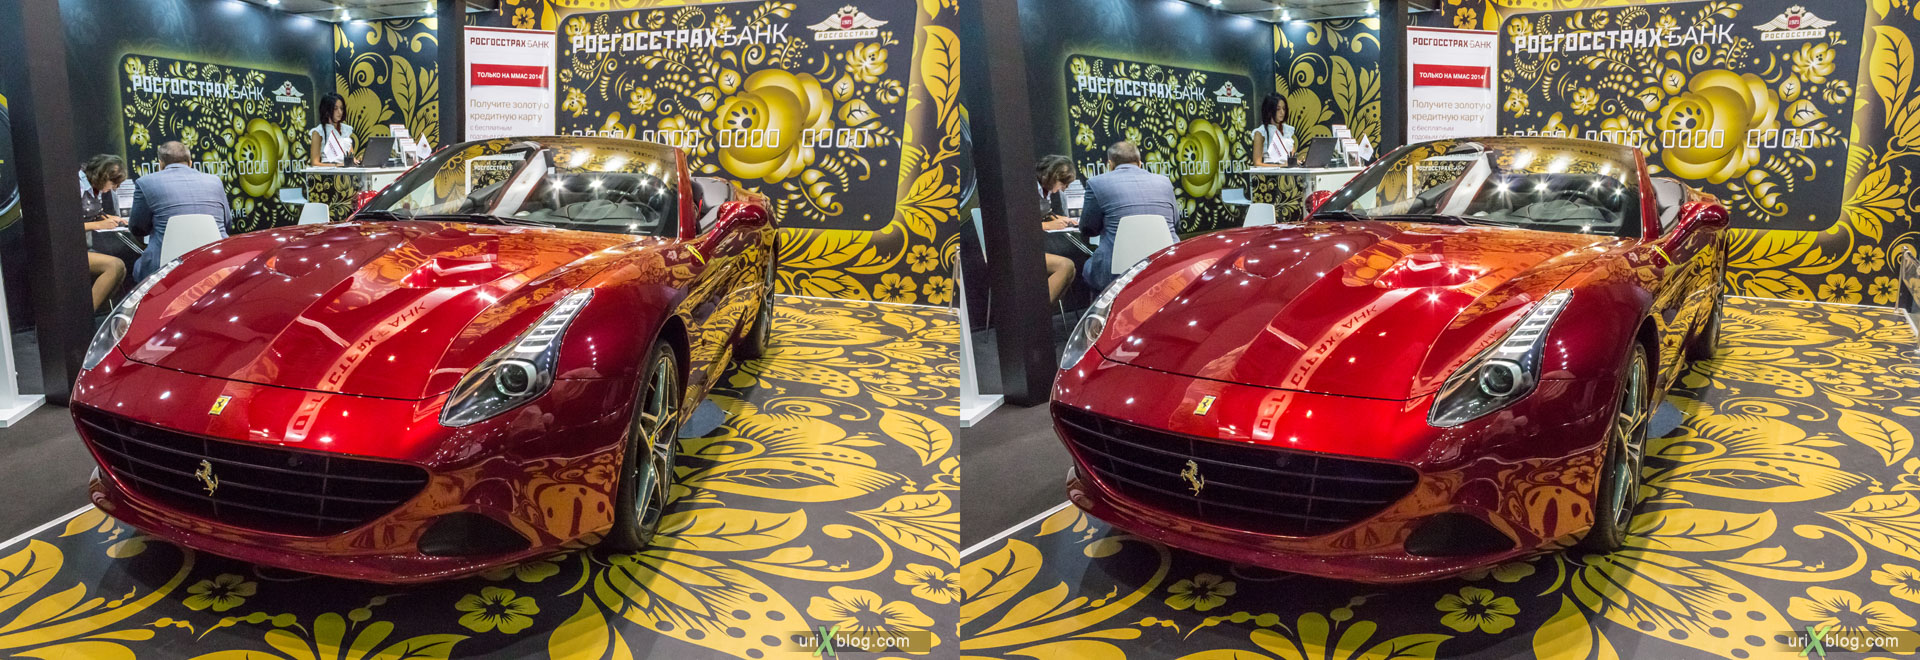 Ferrary, Moscow International Automobile Salon 2014, MIAS 2014, girls, models, Crocus Expo, Moscow, Russia, 3D, stereo pair, cross-eyed, crossview, cross view stereo pair, stereoscopic, 2014